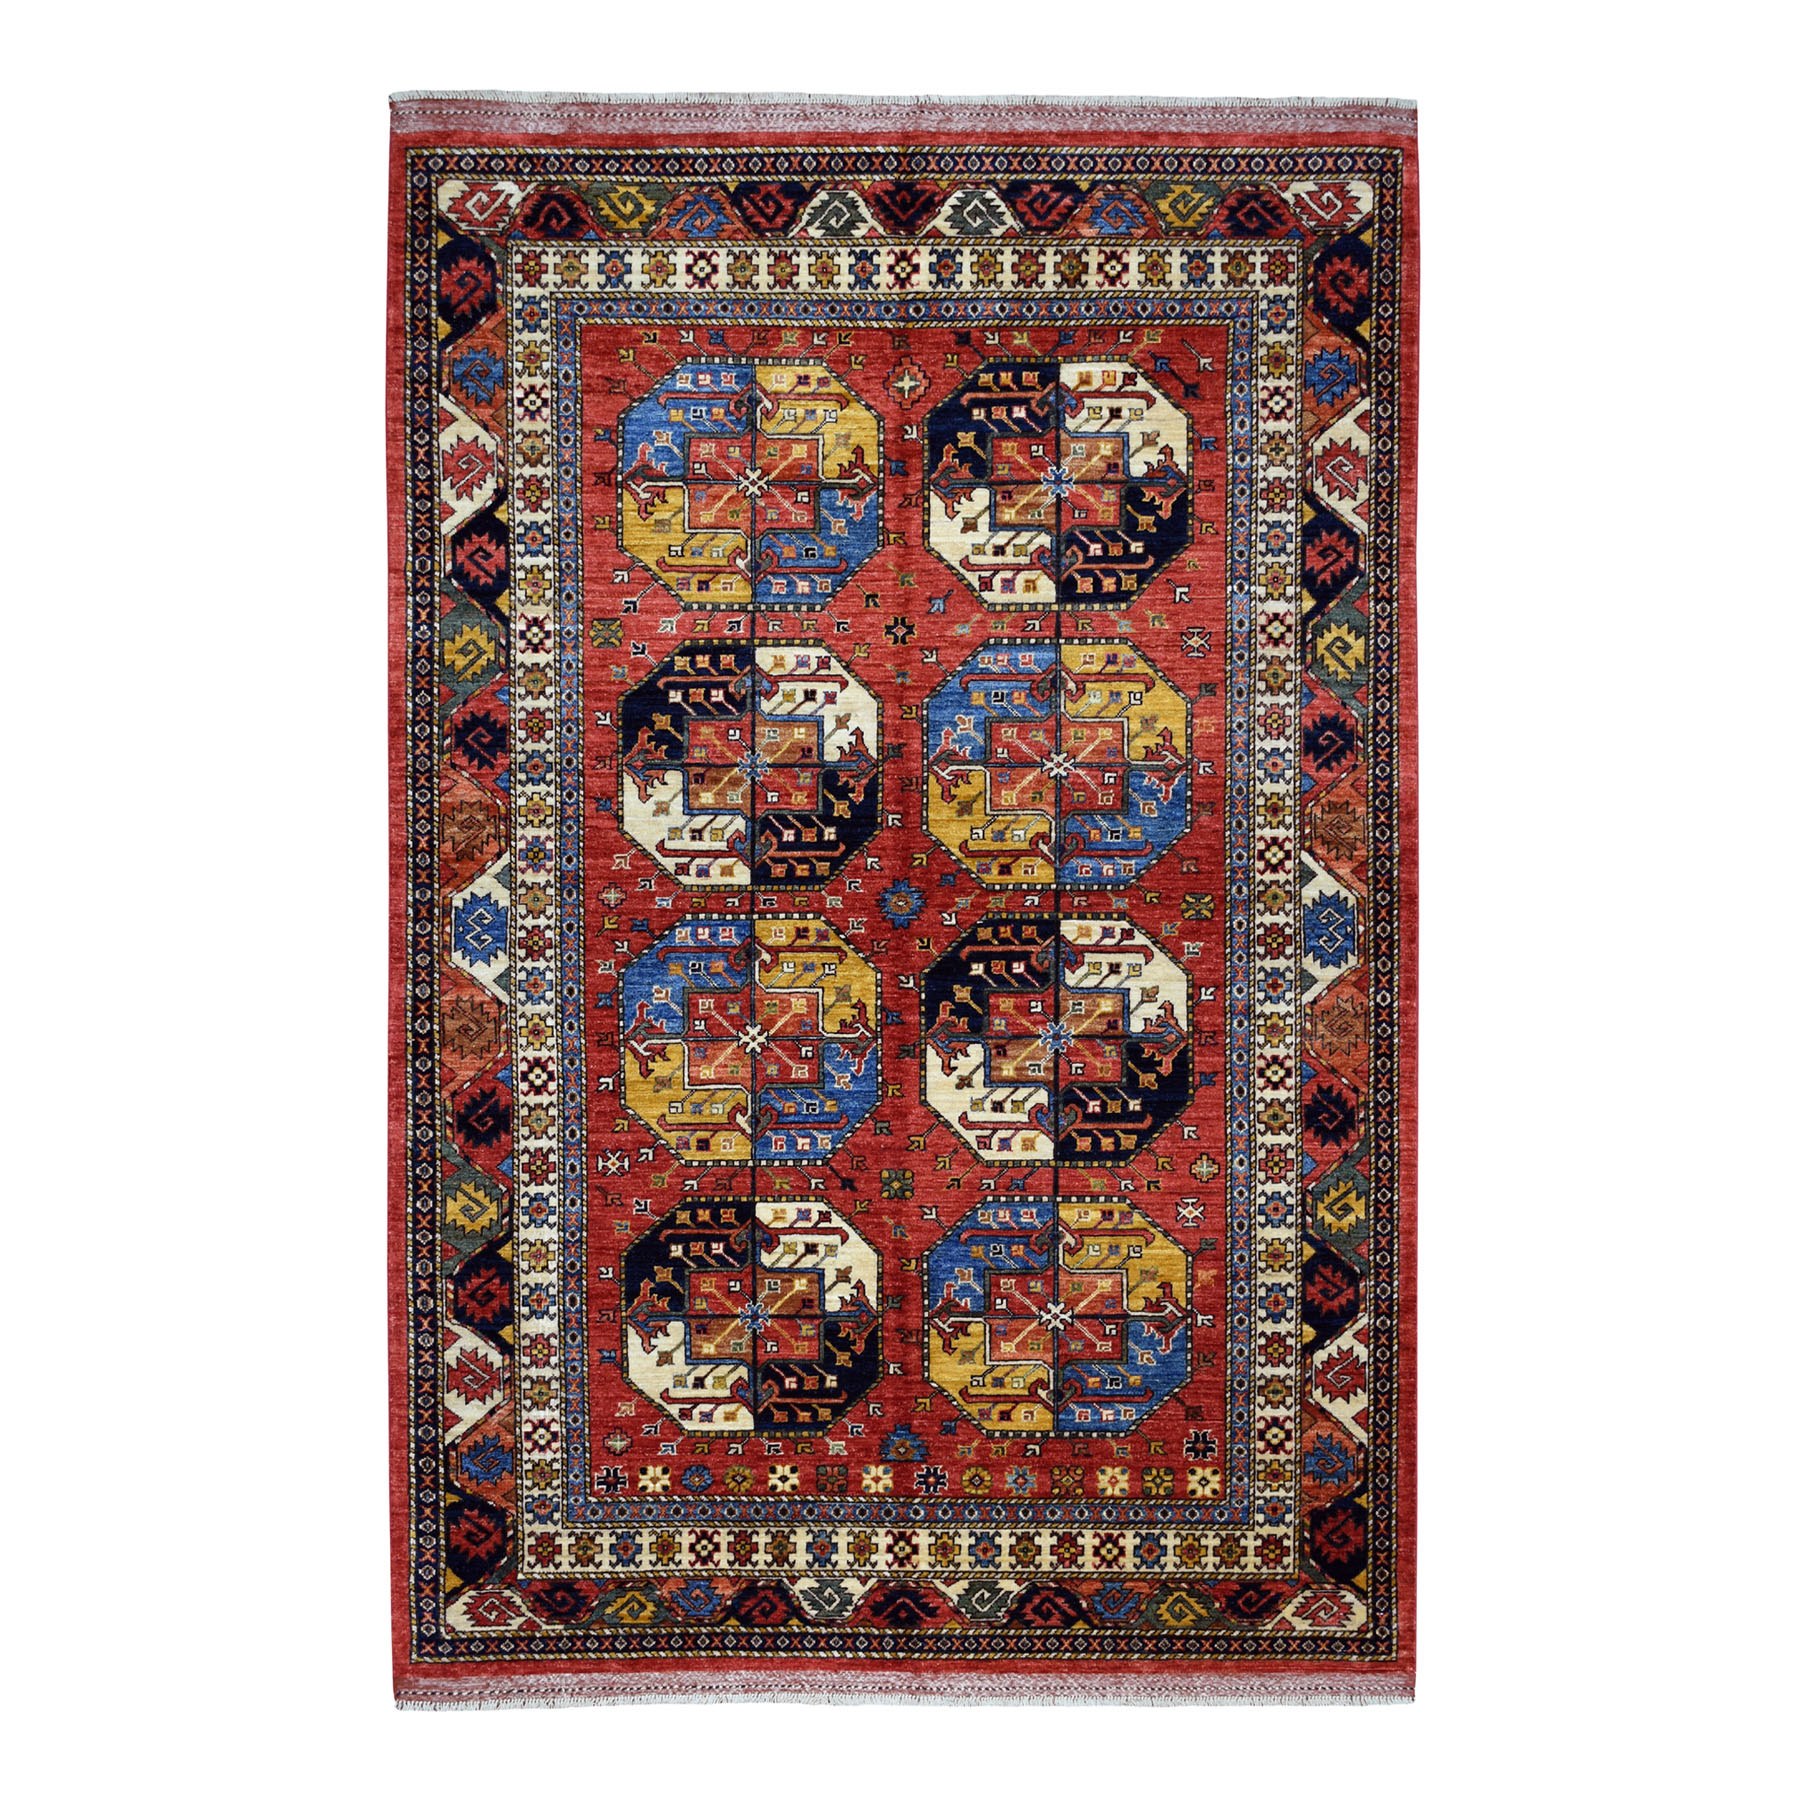 6'X9' Red Elephant Feet Design Afghan Ersari Hand Knotted Pure Wool Oriental Rug moaecce9